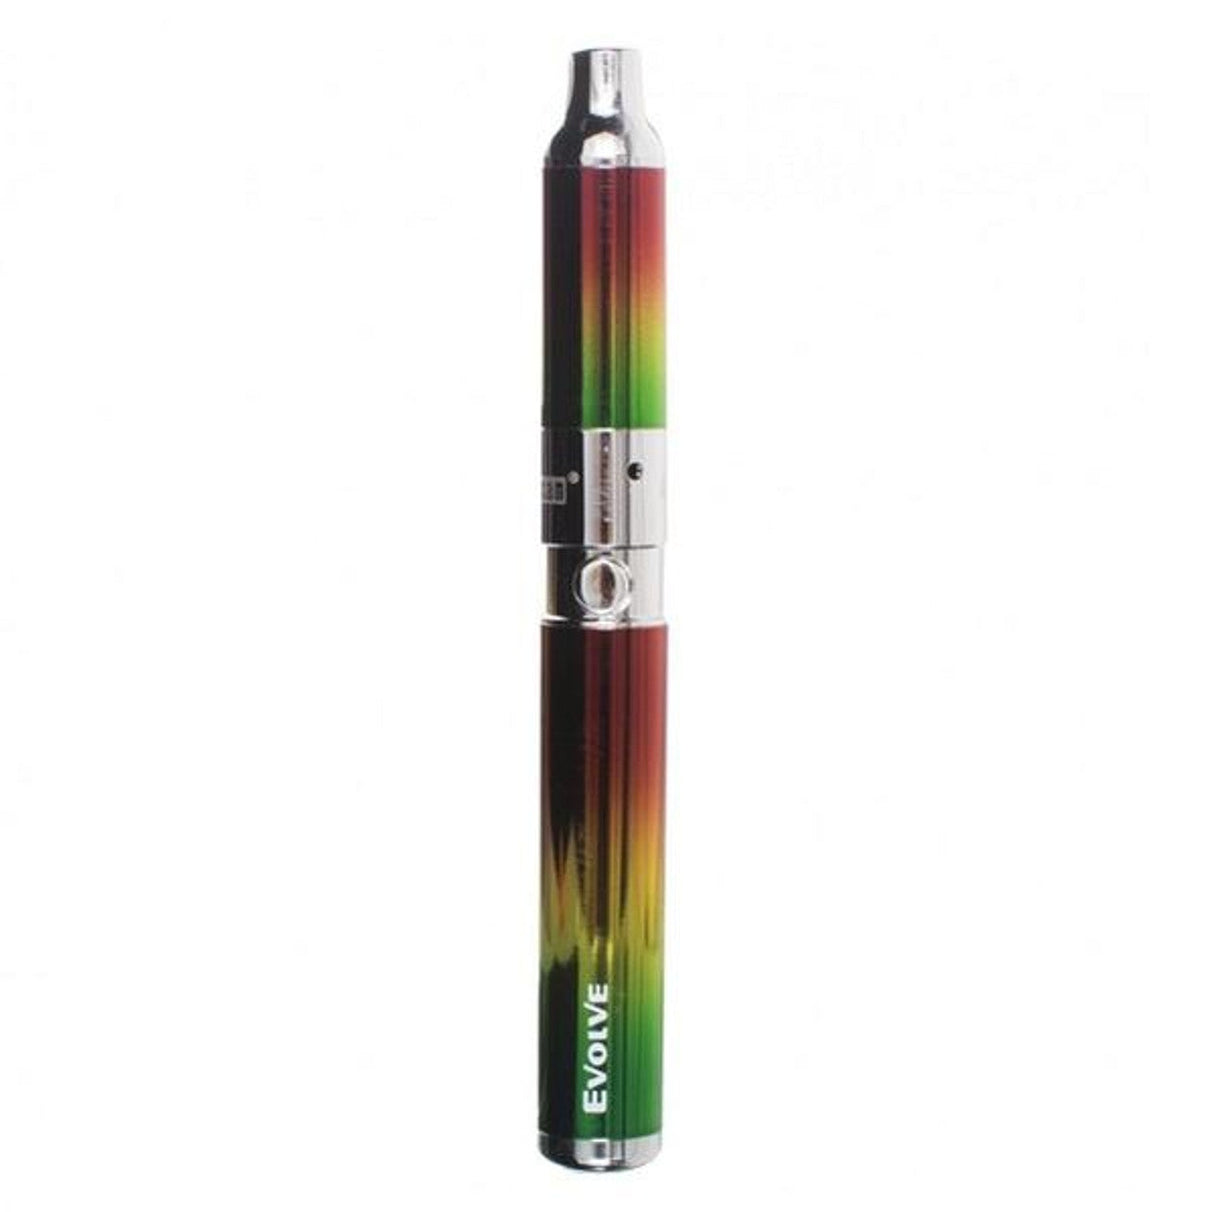 Yocan Evolve Vaporizer in Rasta design, portable dab/wax pen with 650mAh battery, front view